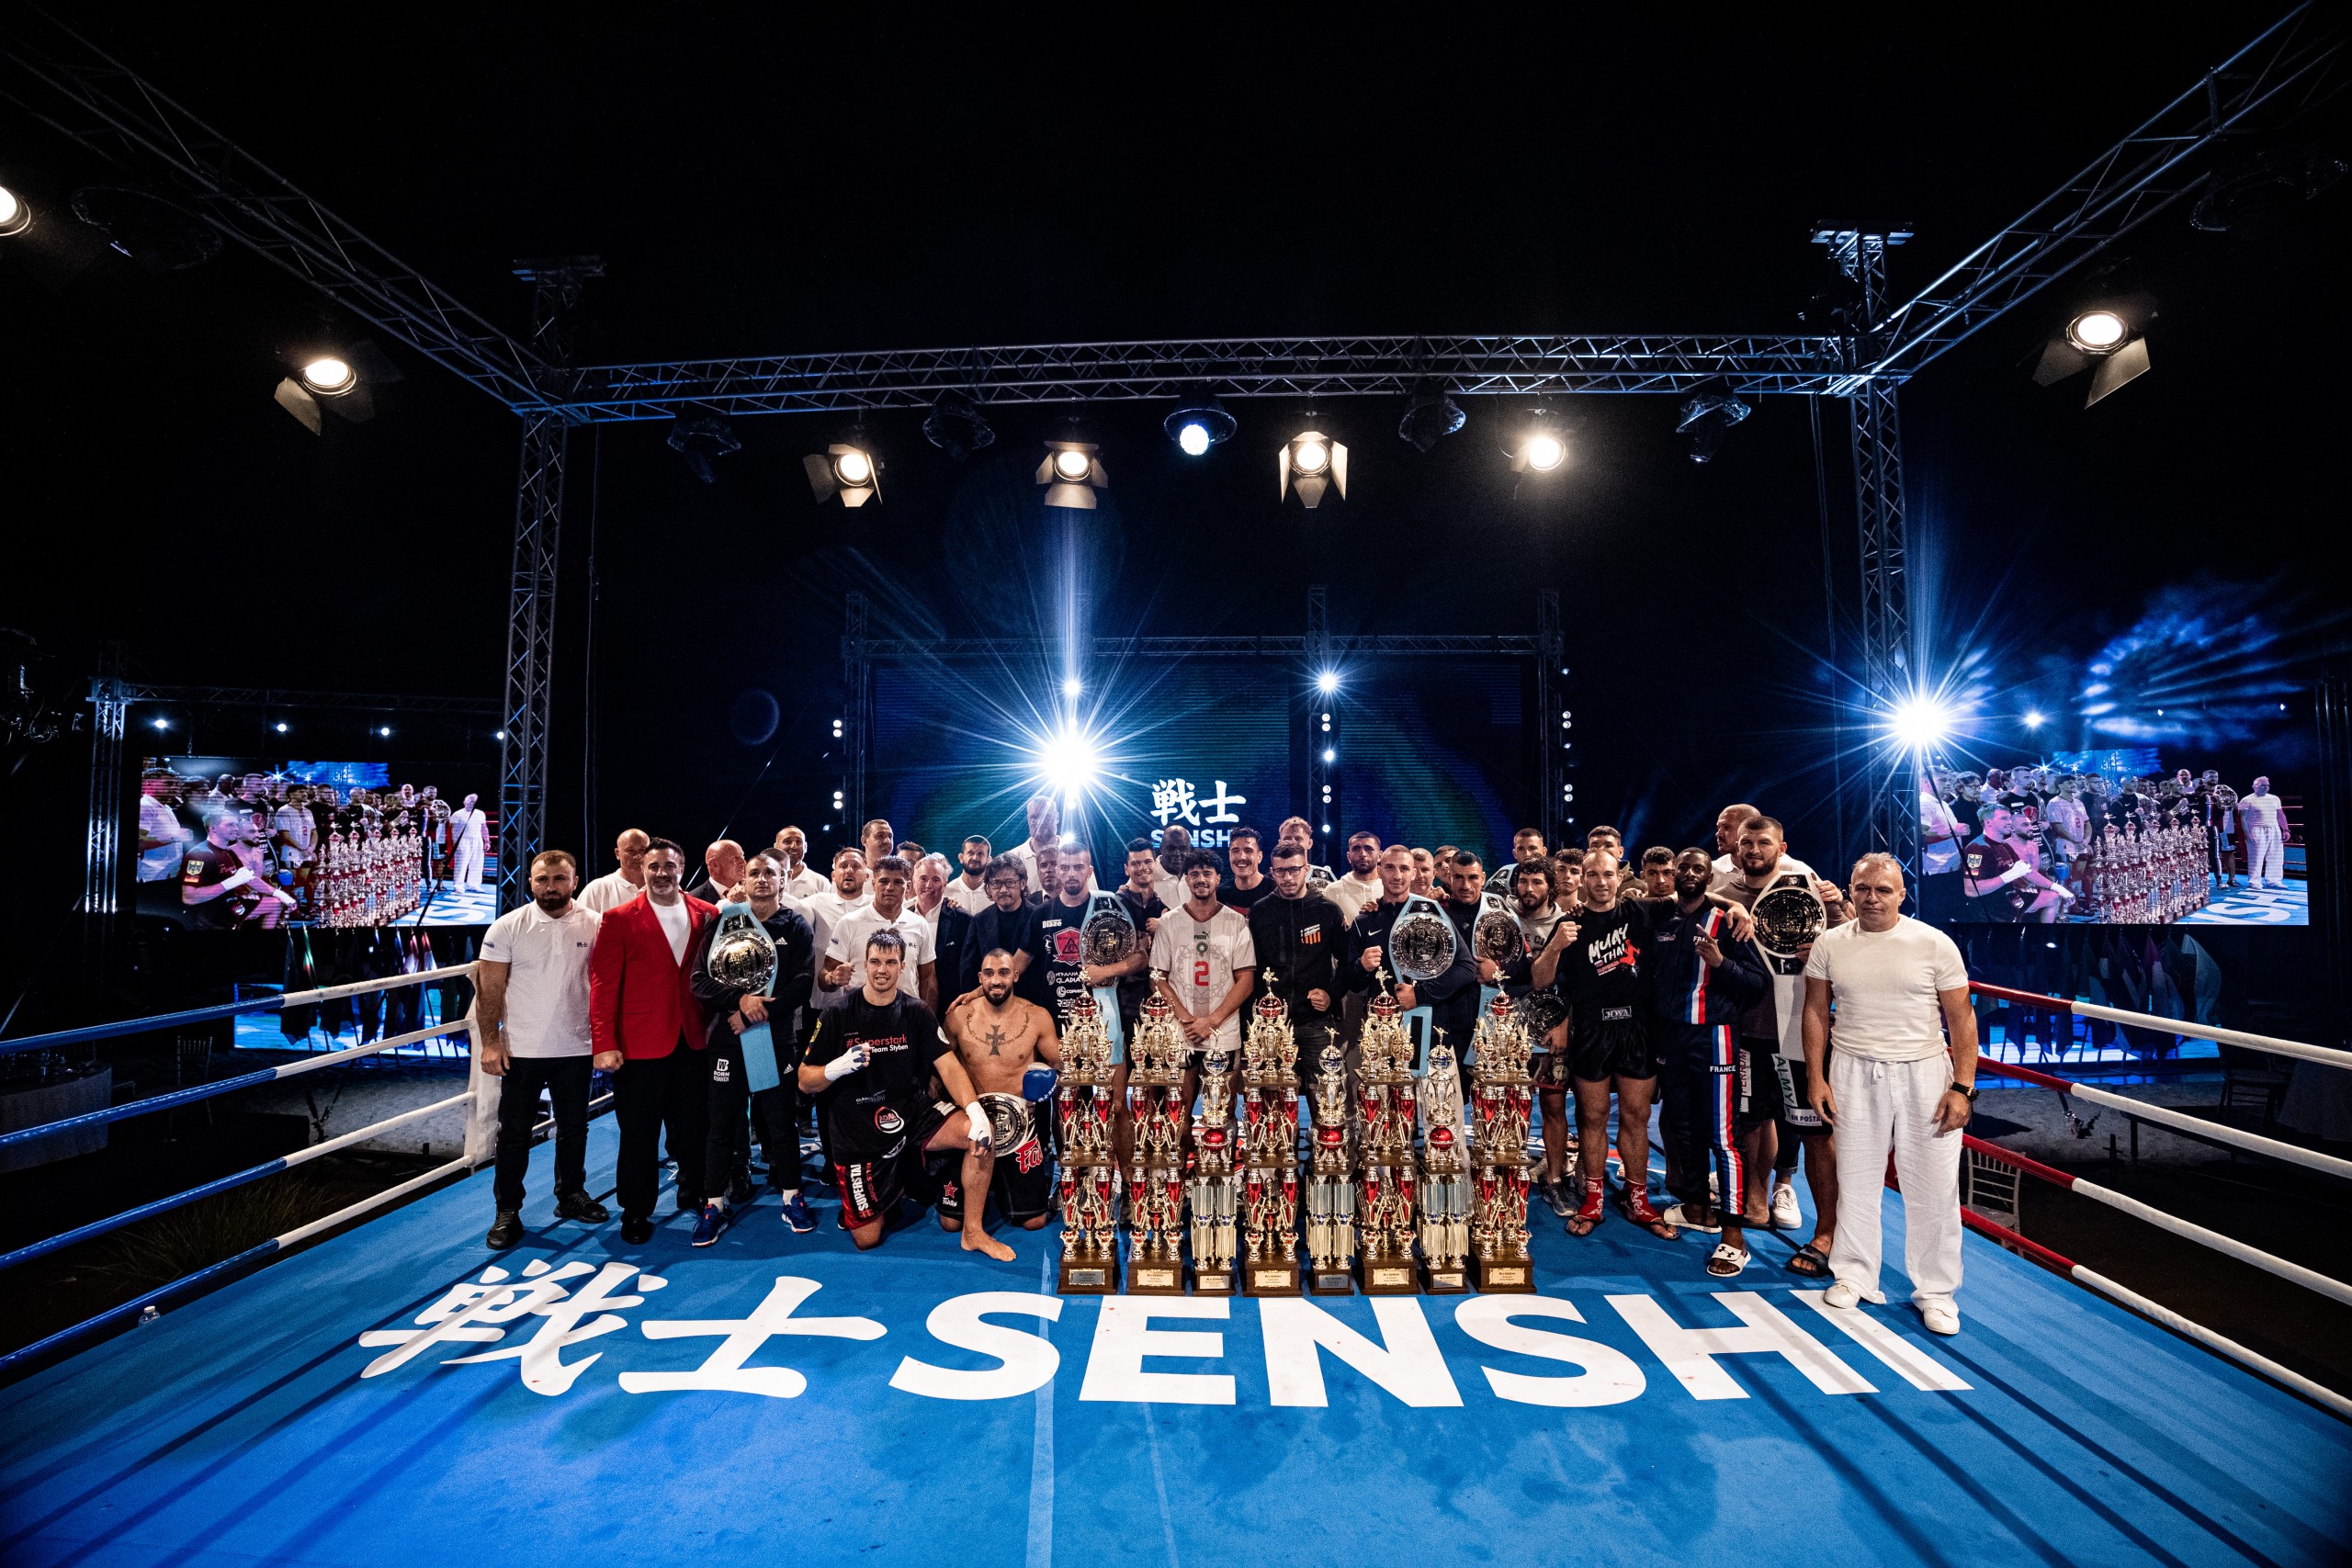 The SENSHI 18 Fight card impresses with 24 strong fighters - Time